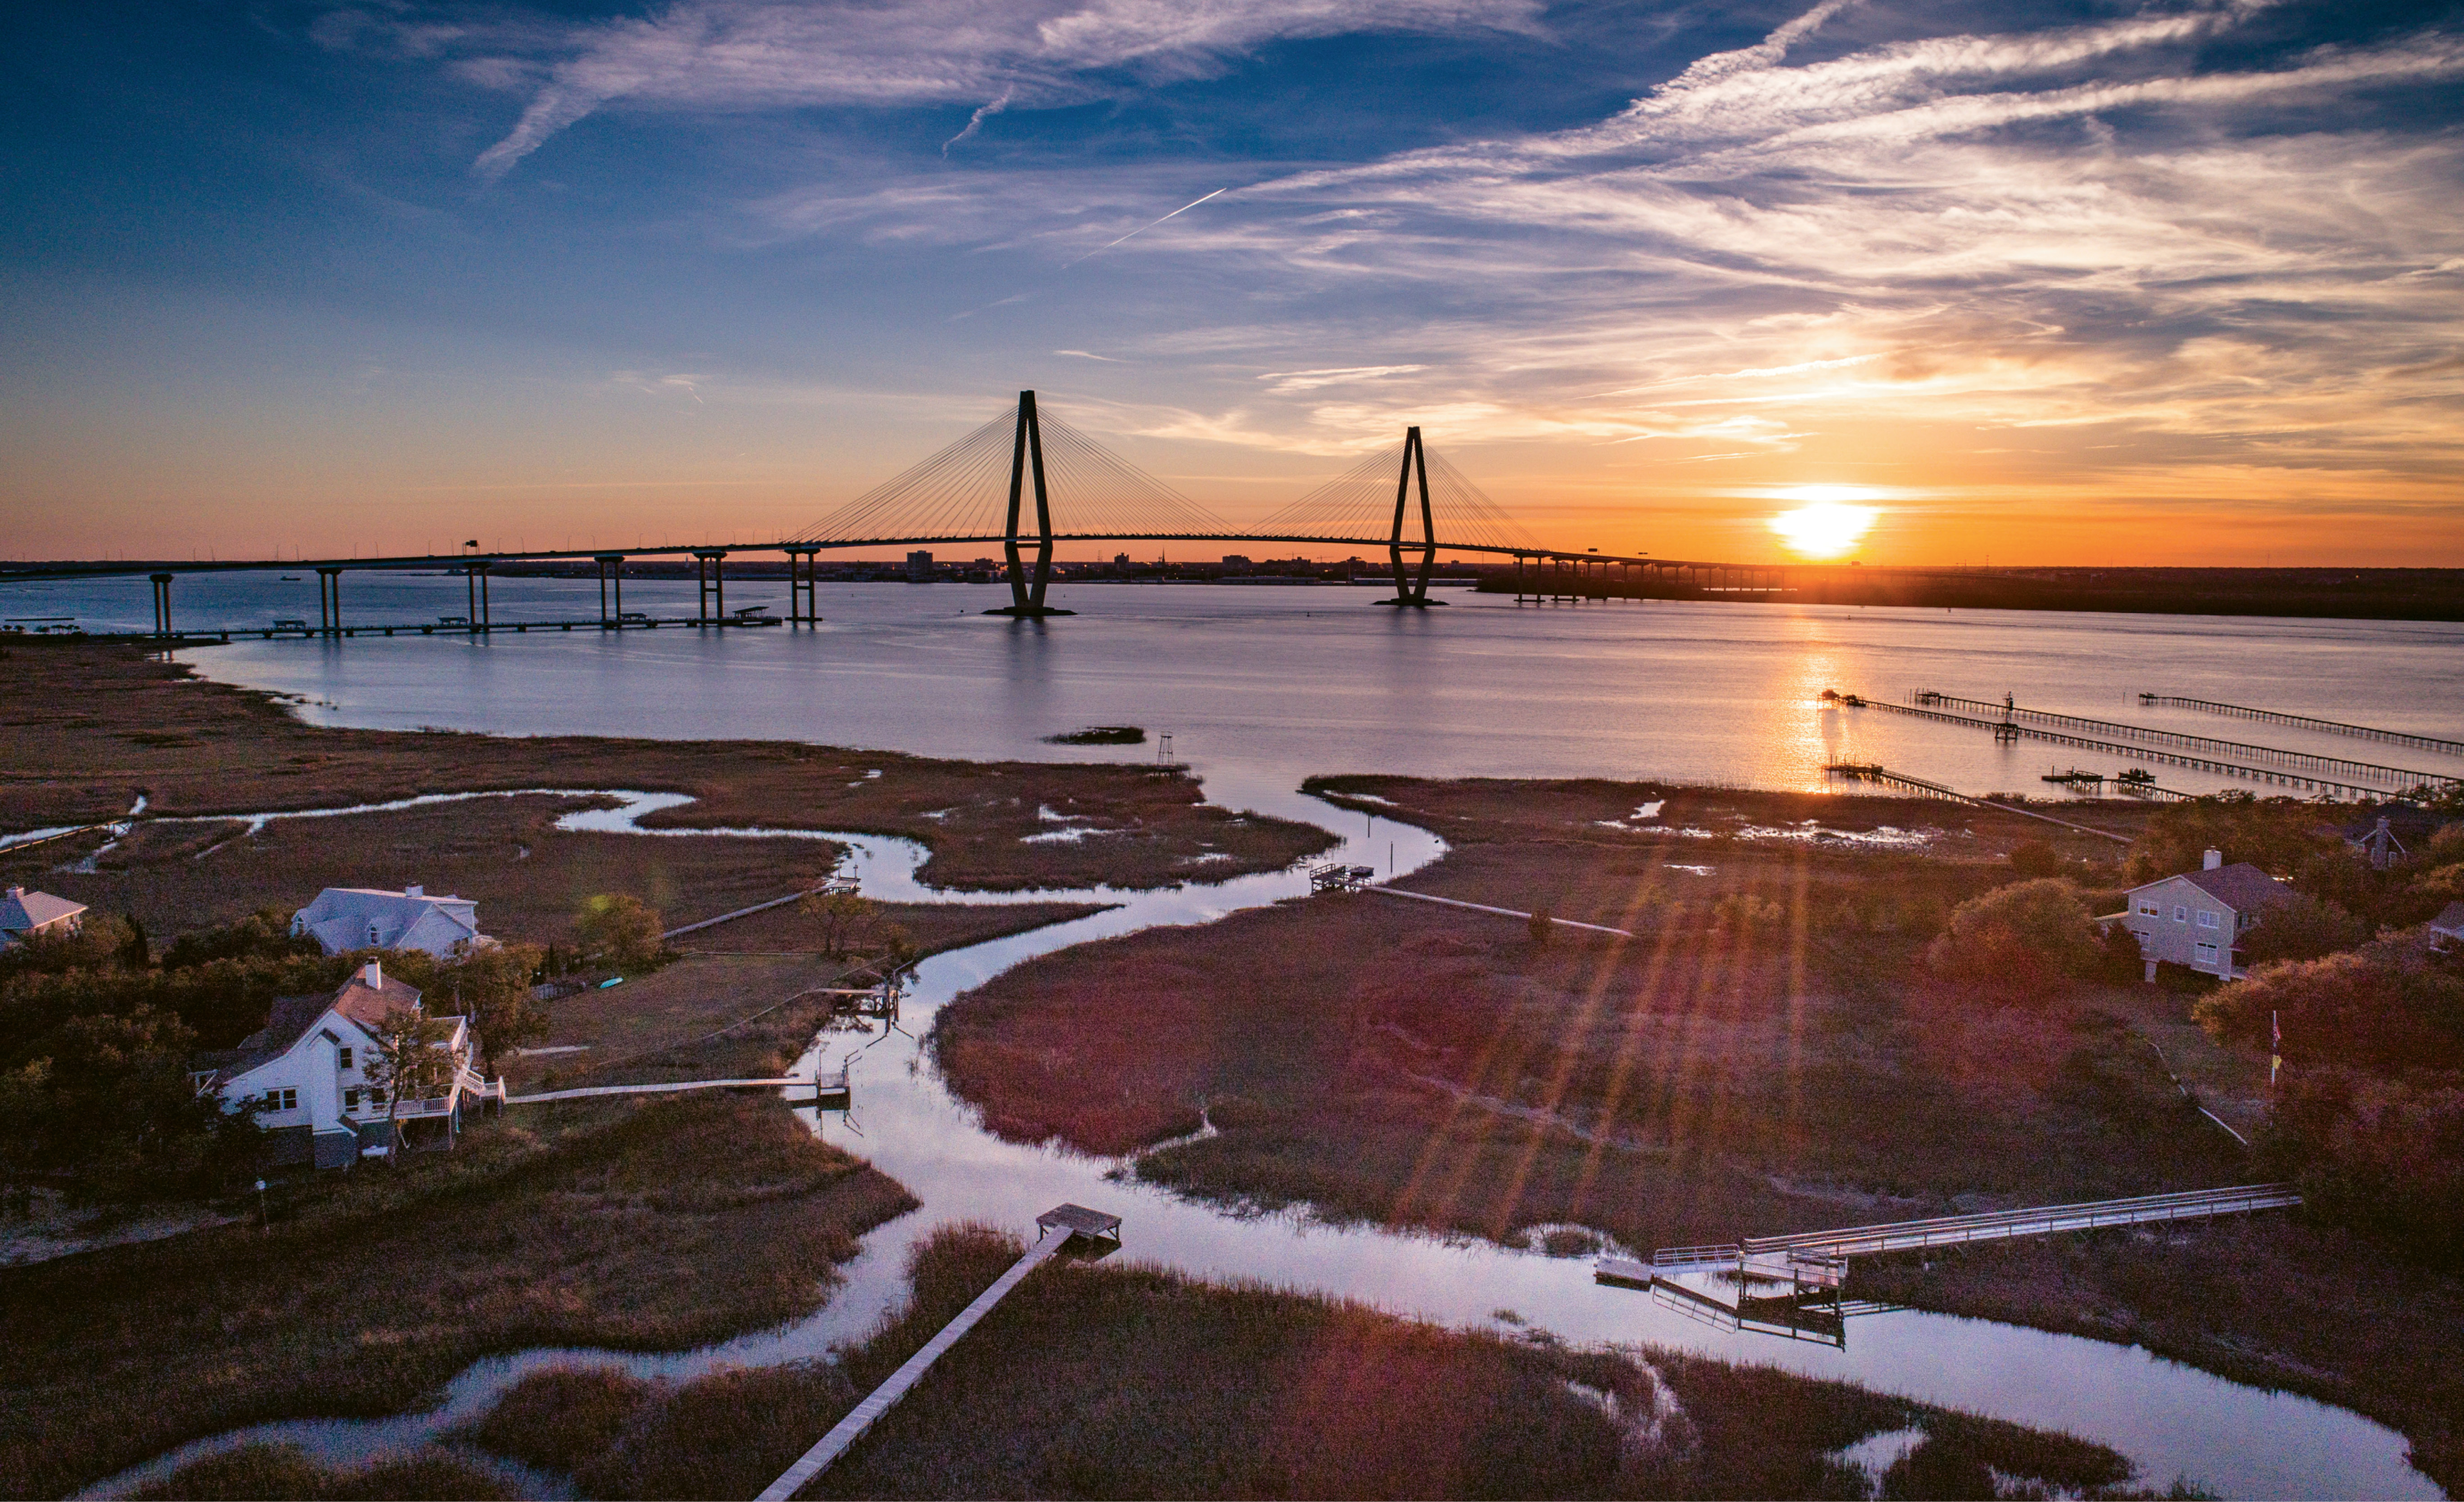 Sunset overlooking the Ravenel Bridge by Nicholas Skylar Holzworth  {Professional category}  - Taken from the Mount Pleasant side of the Cooper River in spring 2017